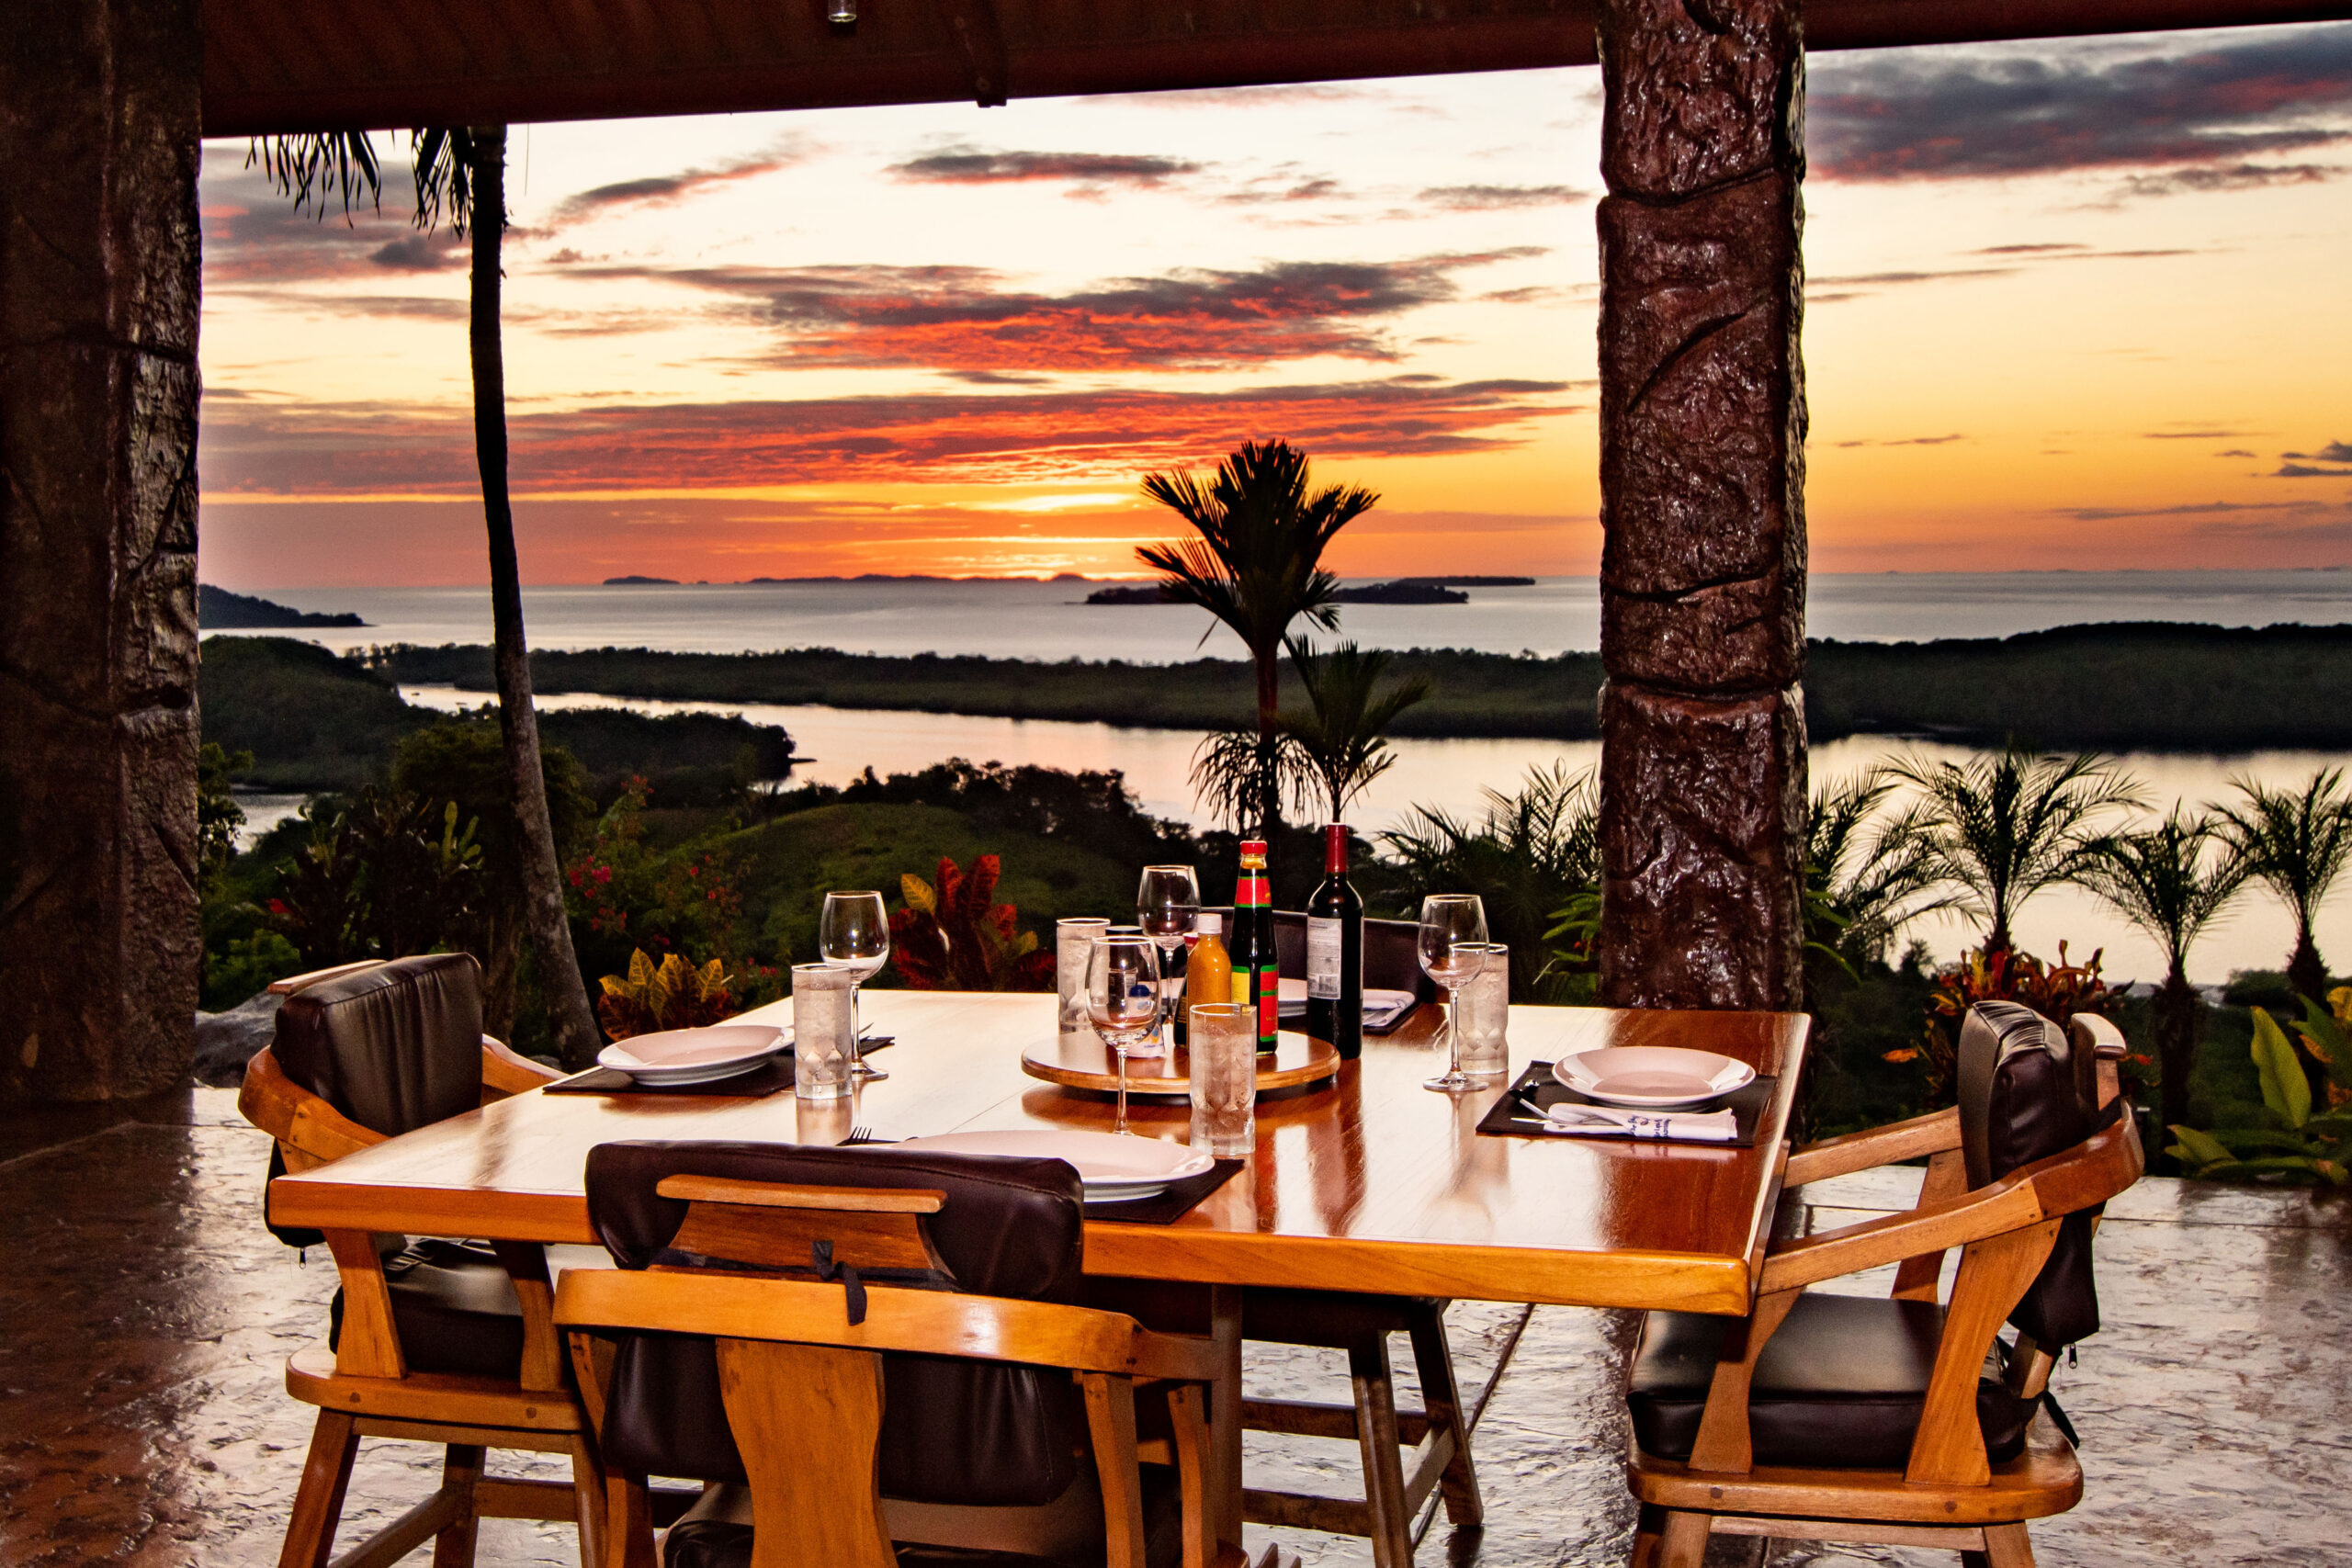 Incredible Sunset views from the Paradise Fishing Lodge